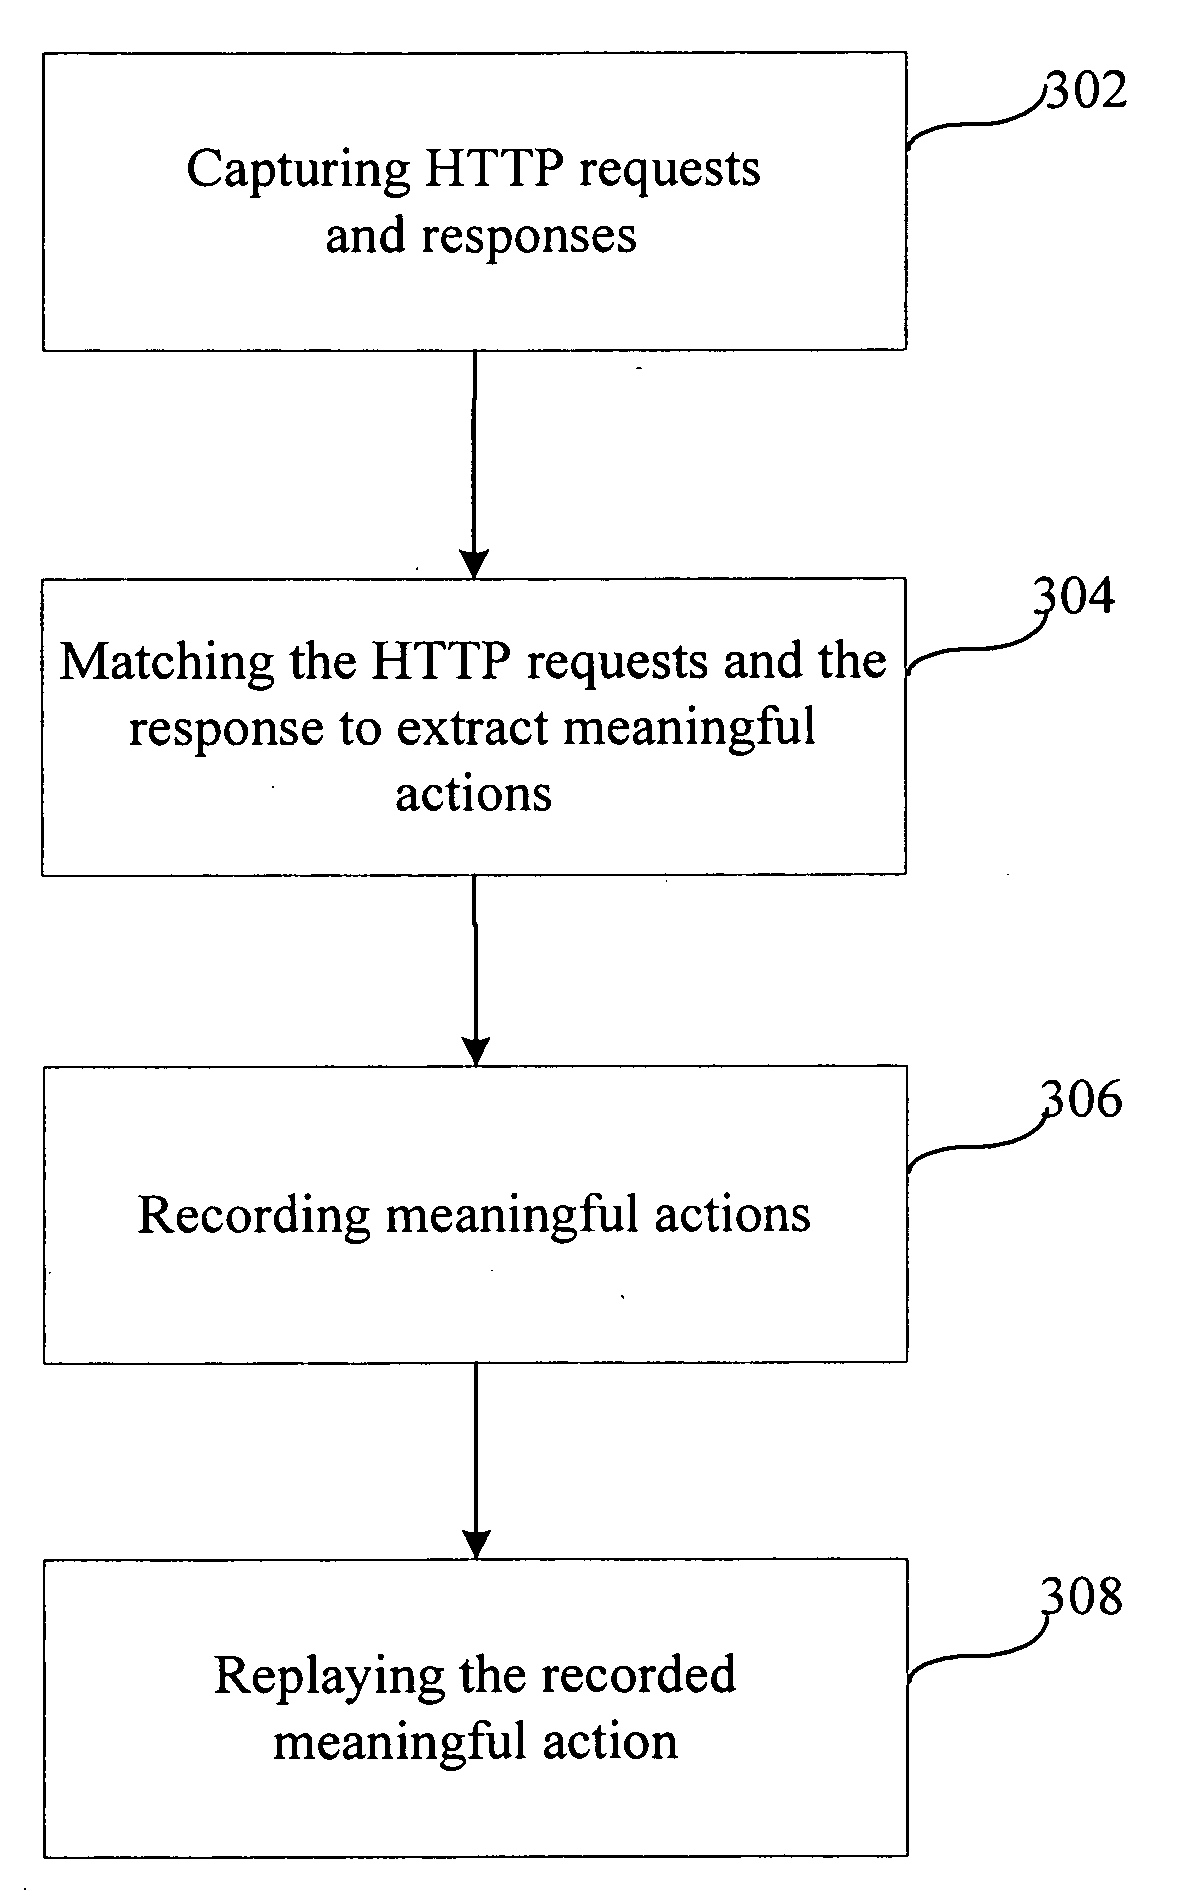 Method and system for automatic setup in web-based applications